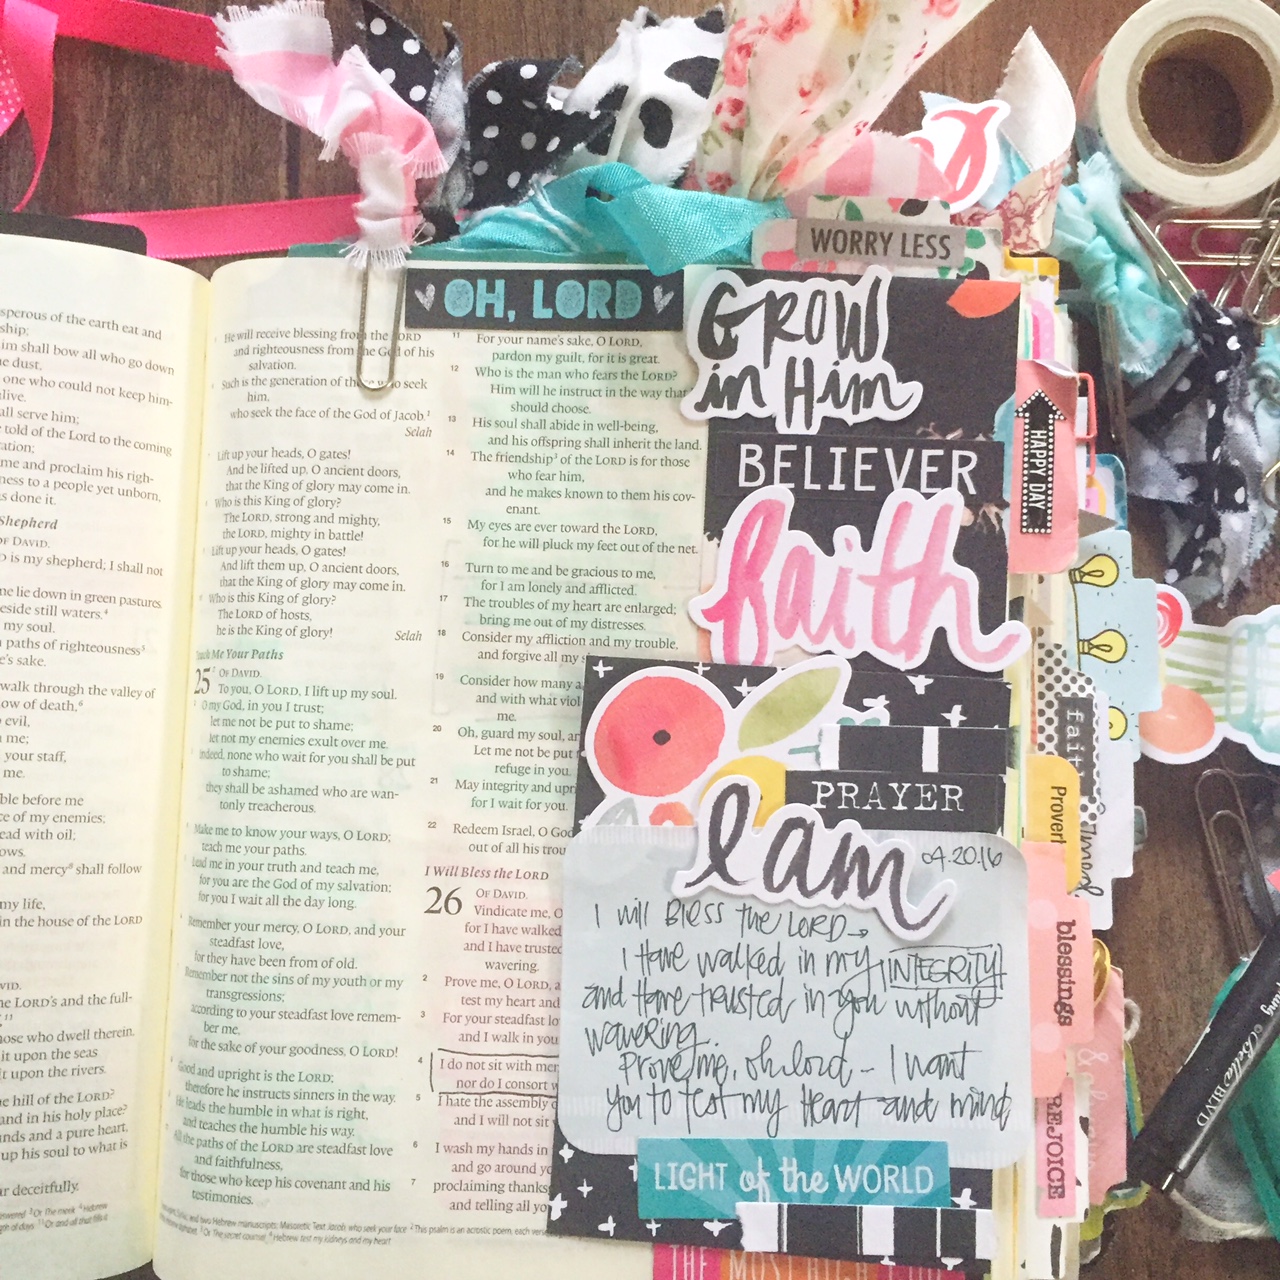 7 Clever Ways To Use Your Bible Journaling Supplies